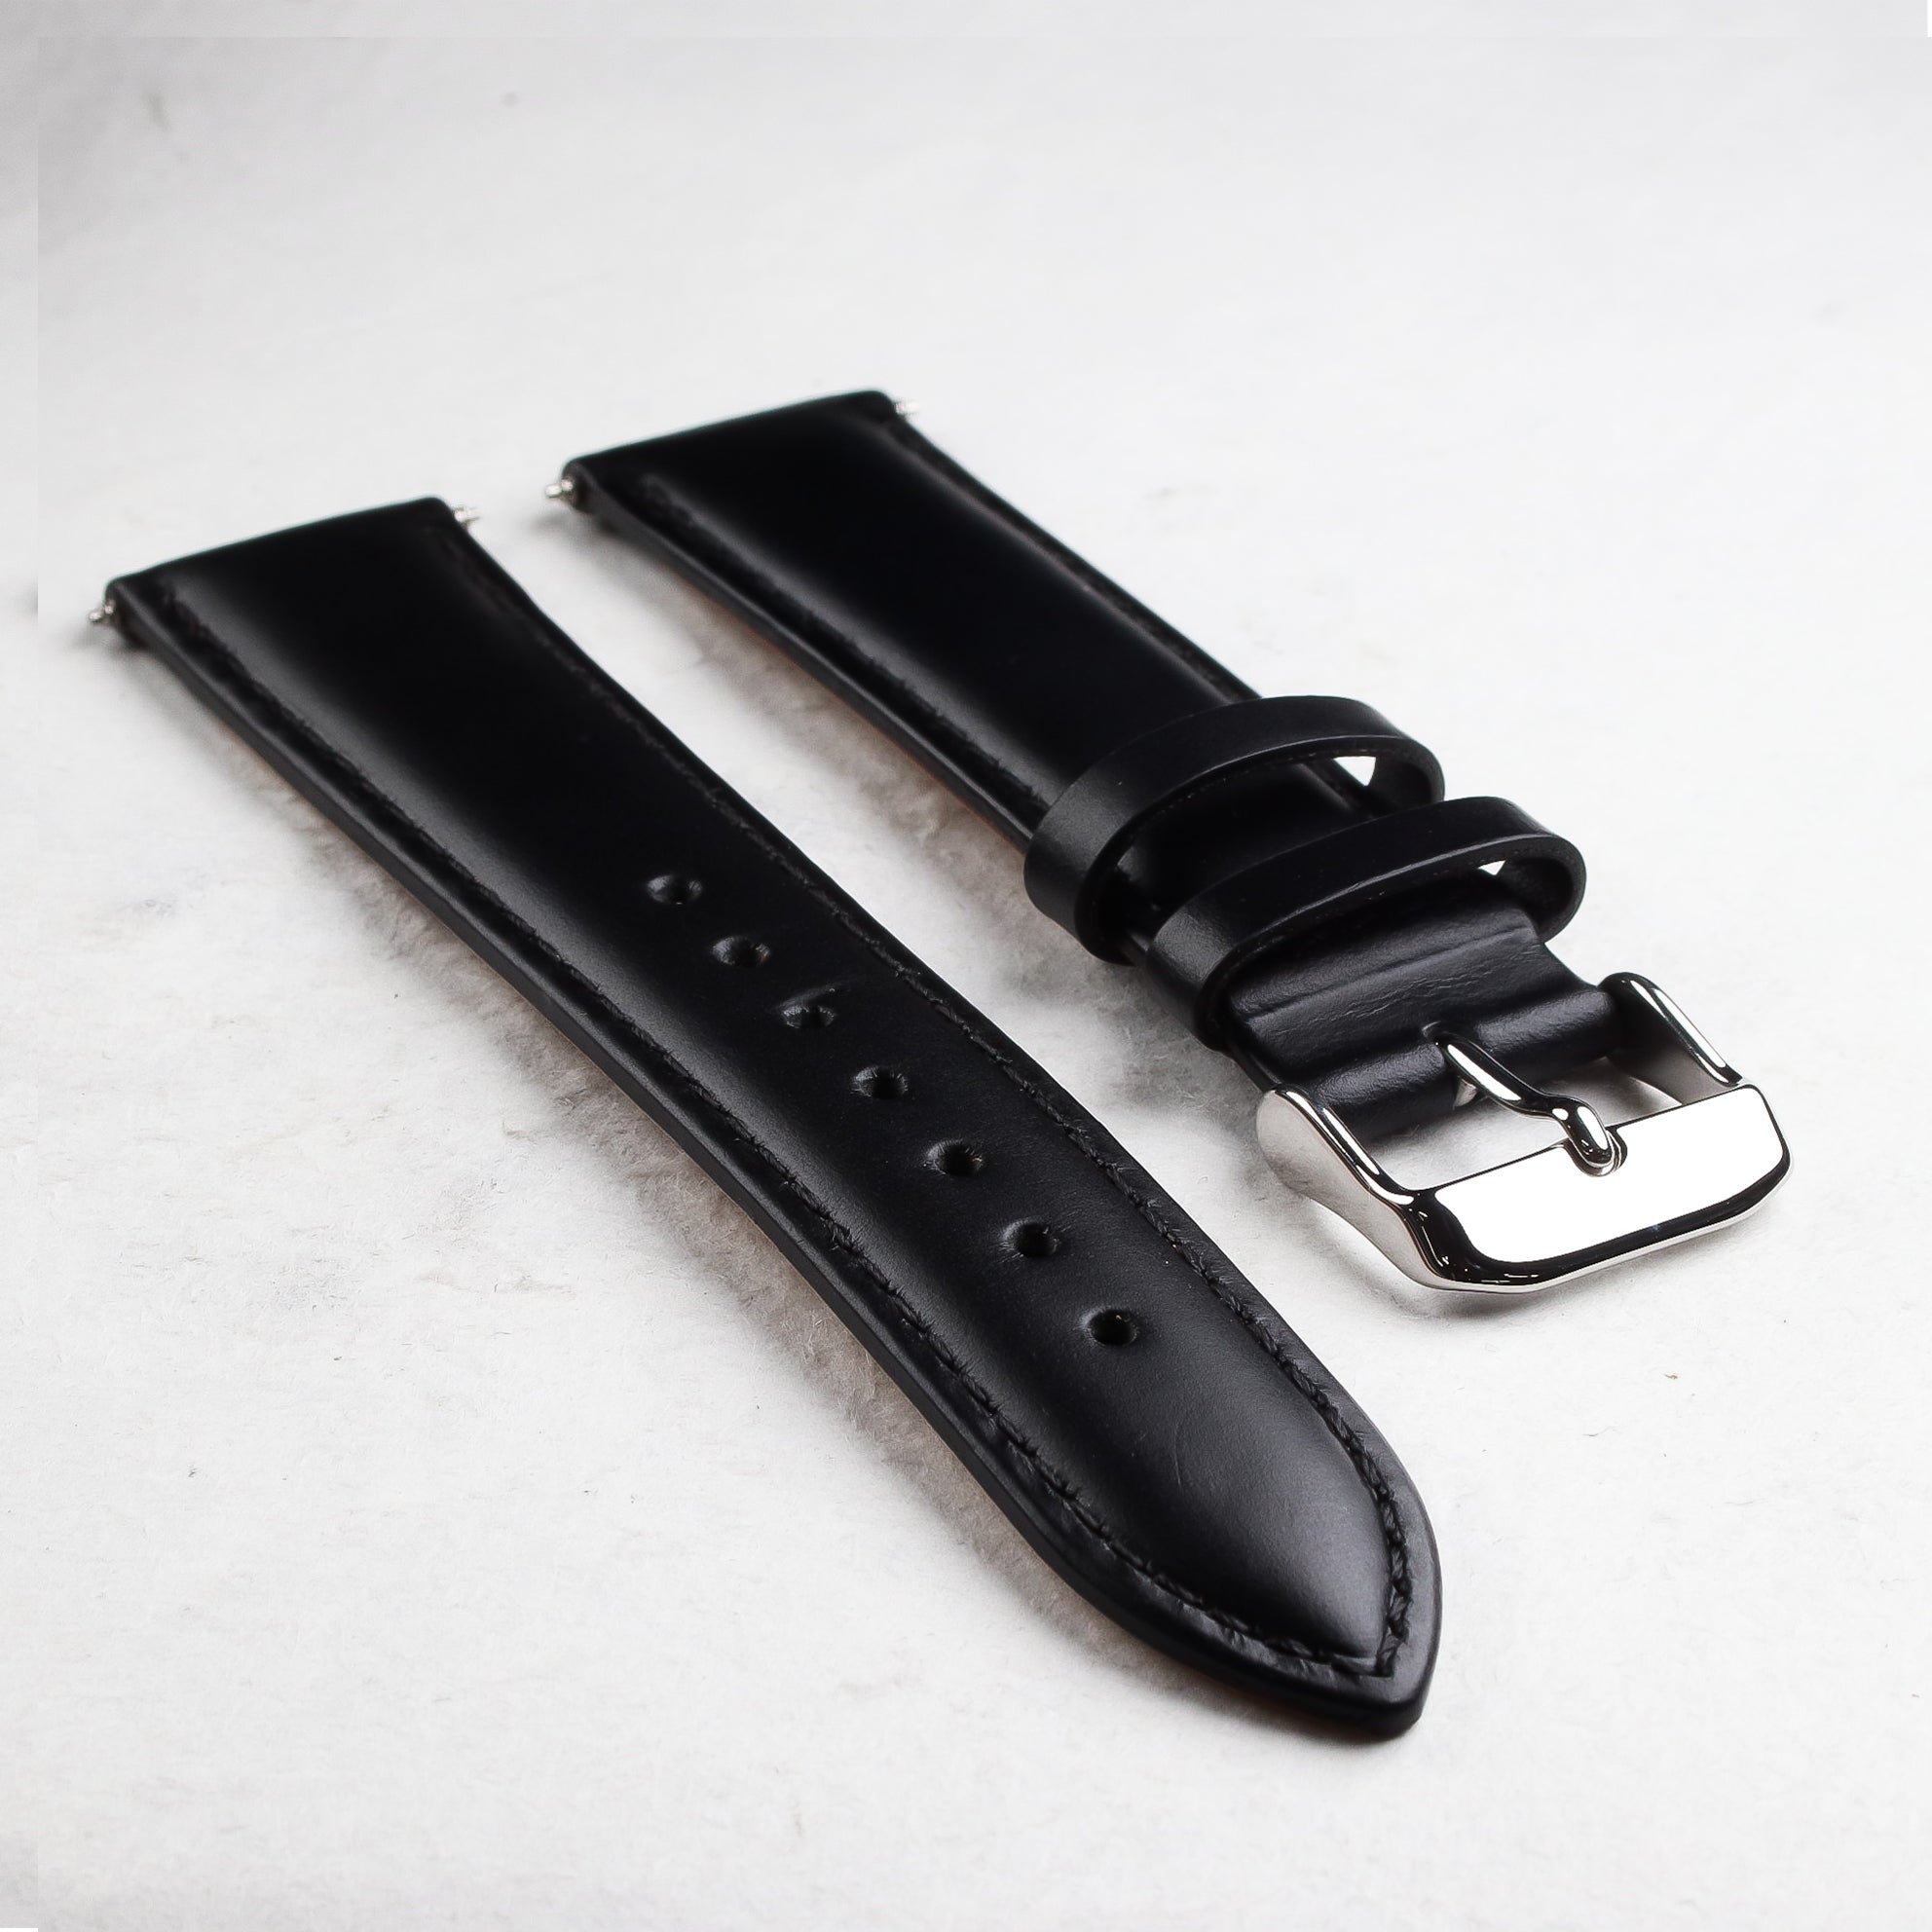 Calfskin Leather Strap - Wancher Watch Wancher Watch Black Wancher Watch Calfskin Leather Strap {{ Automatic Watch {{ Watch }} }} {{ Japan }}Wancher 20mm Calfskin Leather Strap with Silver Clasp and Quick-release pins Closure - premium quality leather strap for watches.